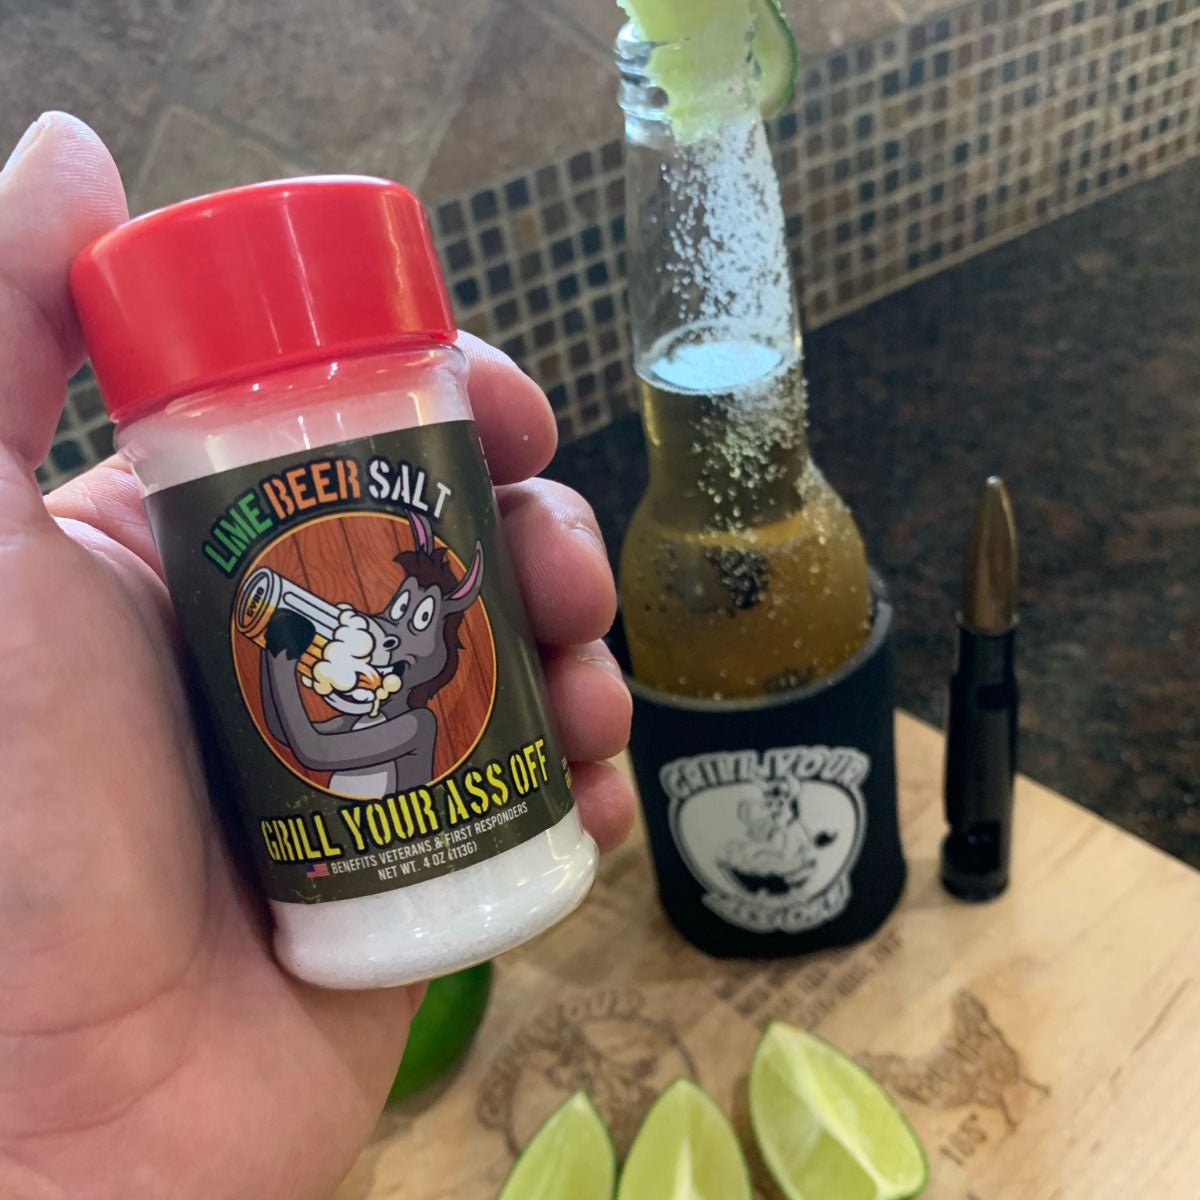 LIME BEER SALT - Grill Your Ass Off